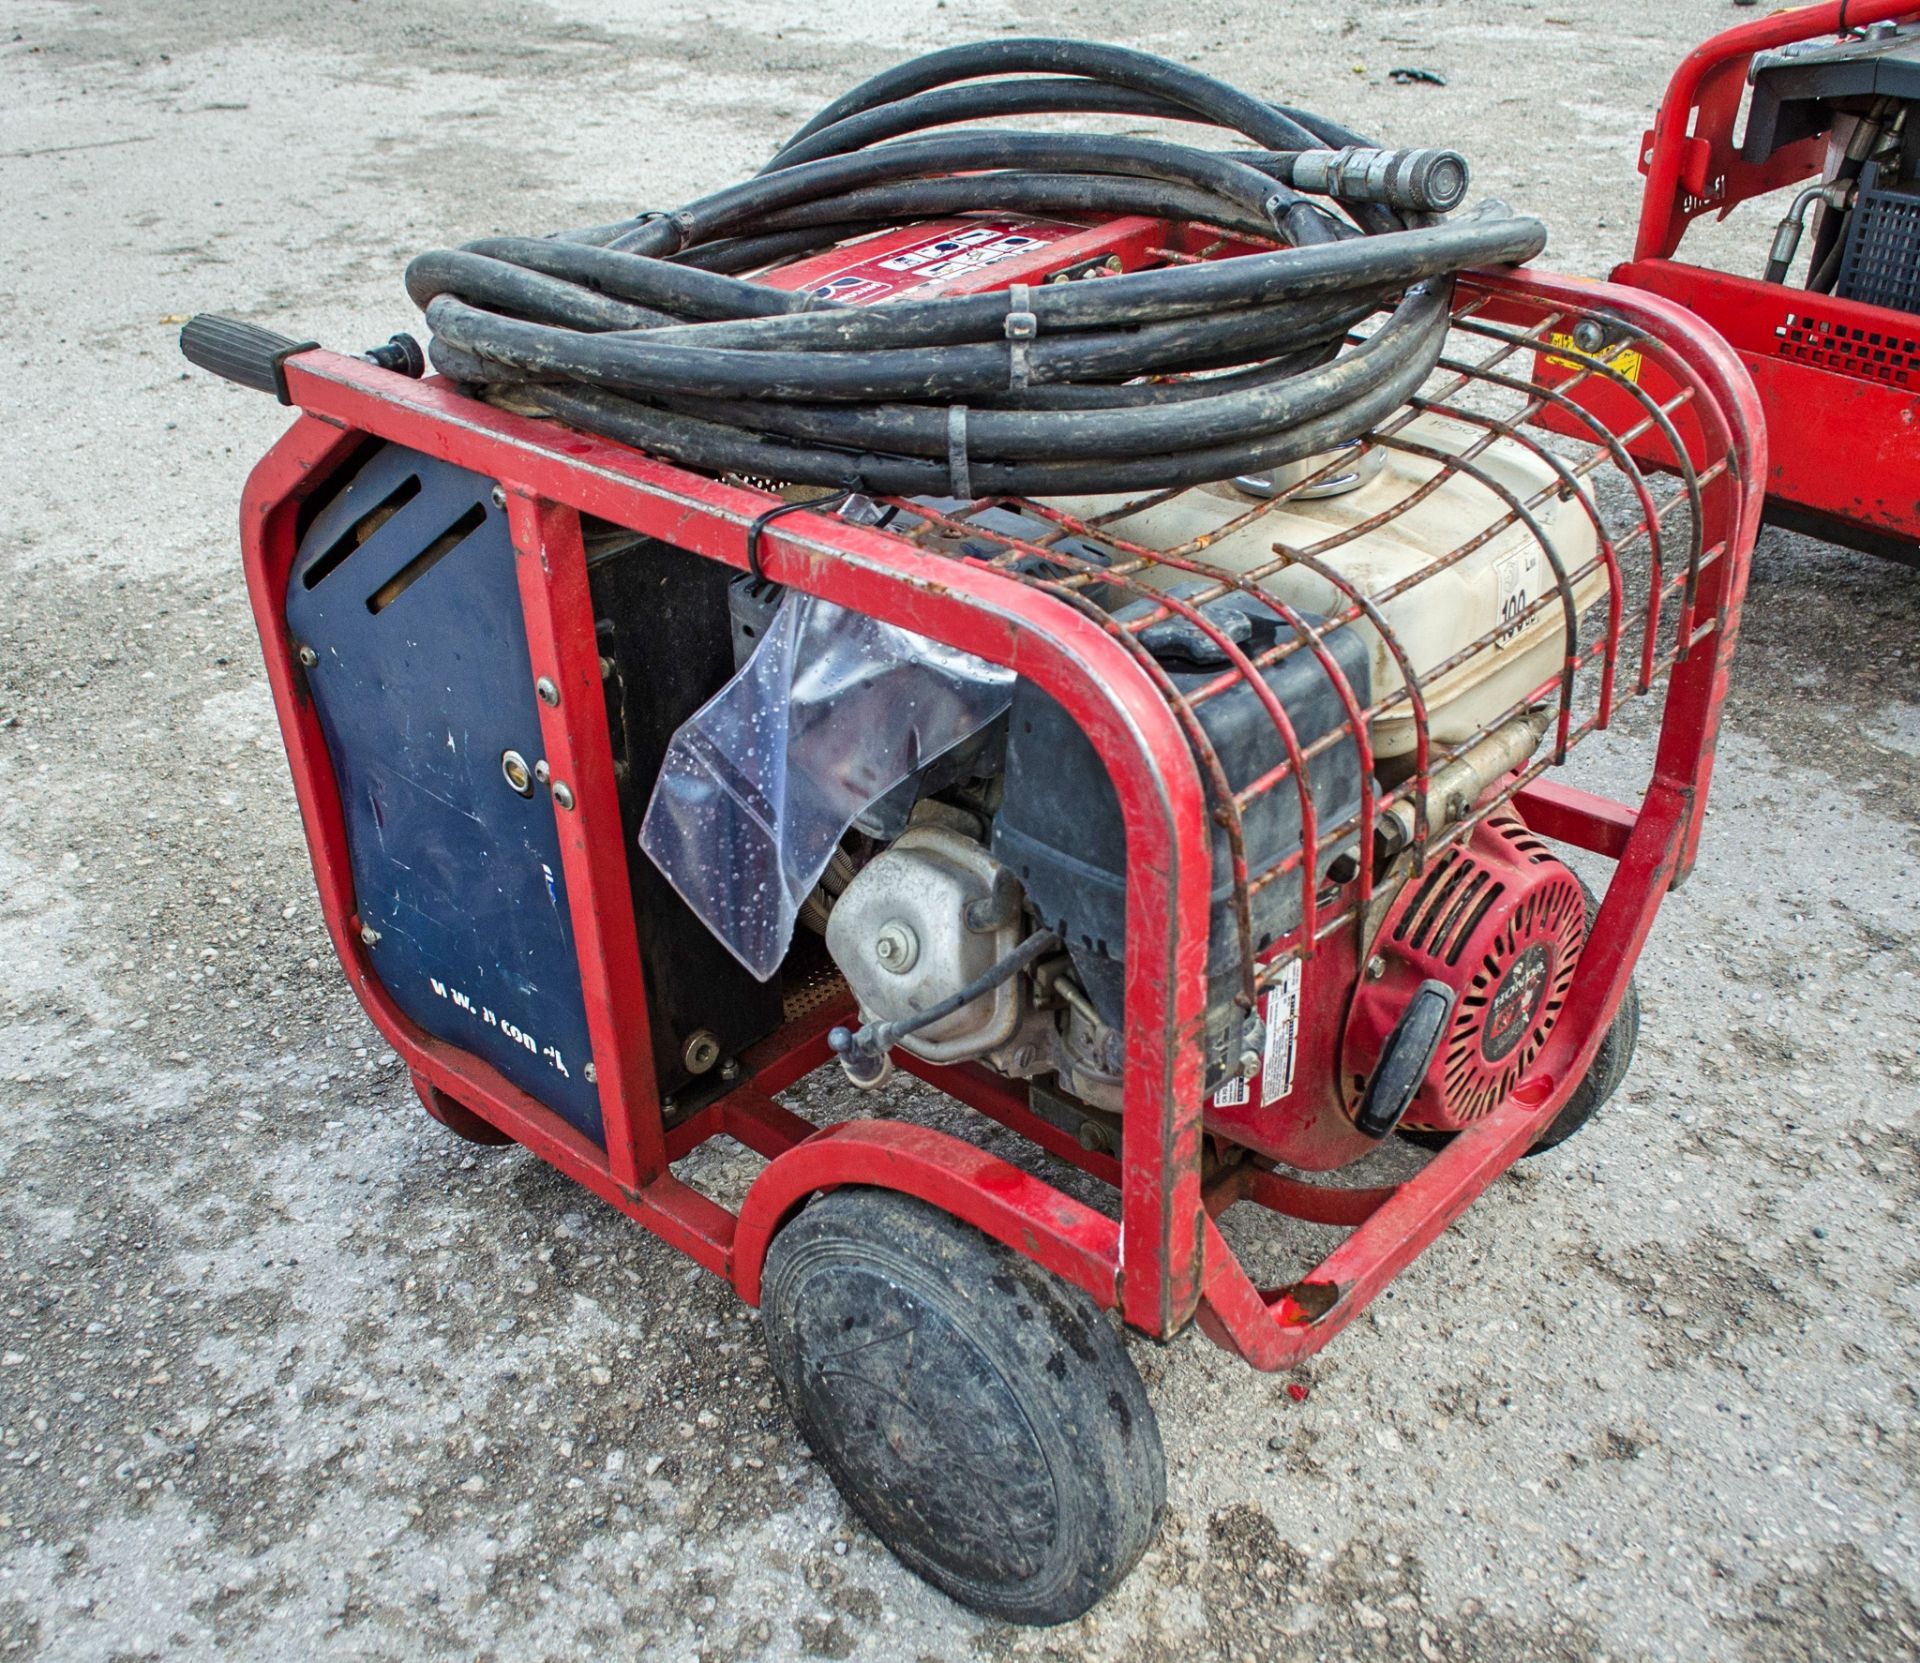 Hycon petrol driven hydraulic power pack c/w hoses 05370061 - Image 2 of 3